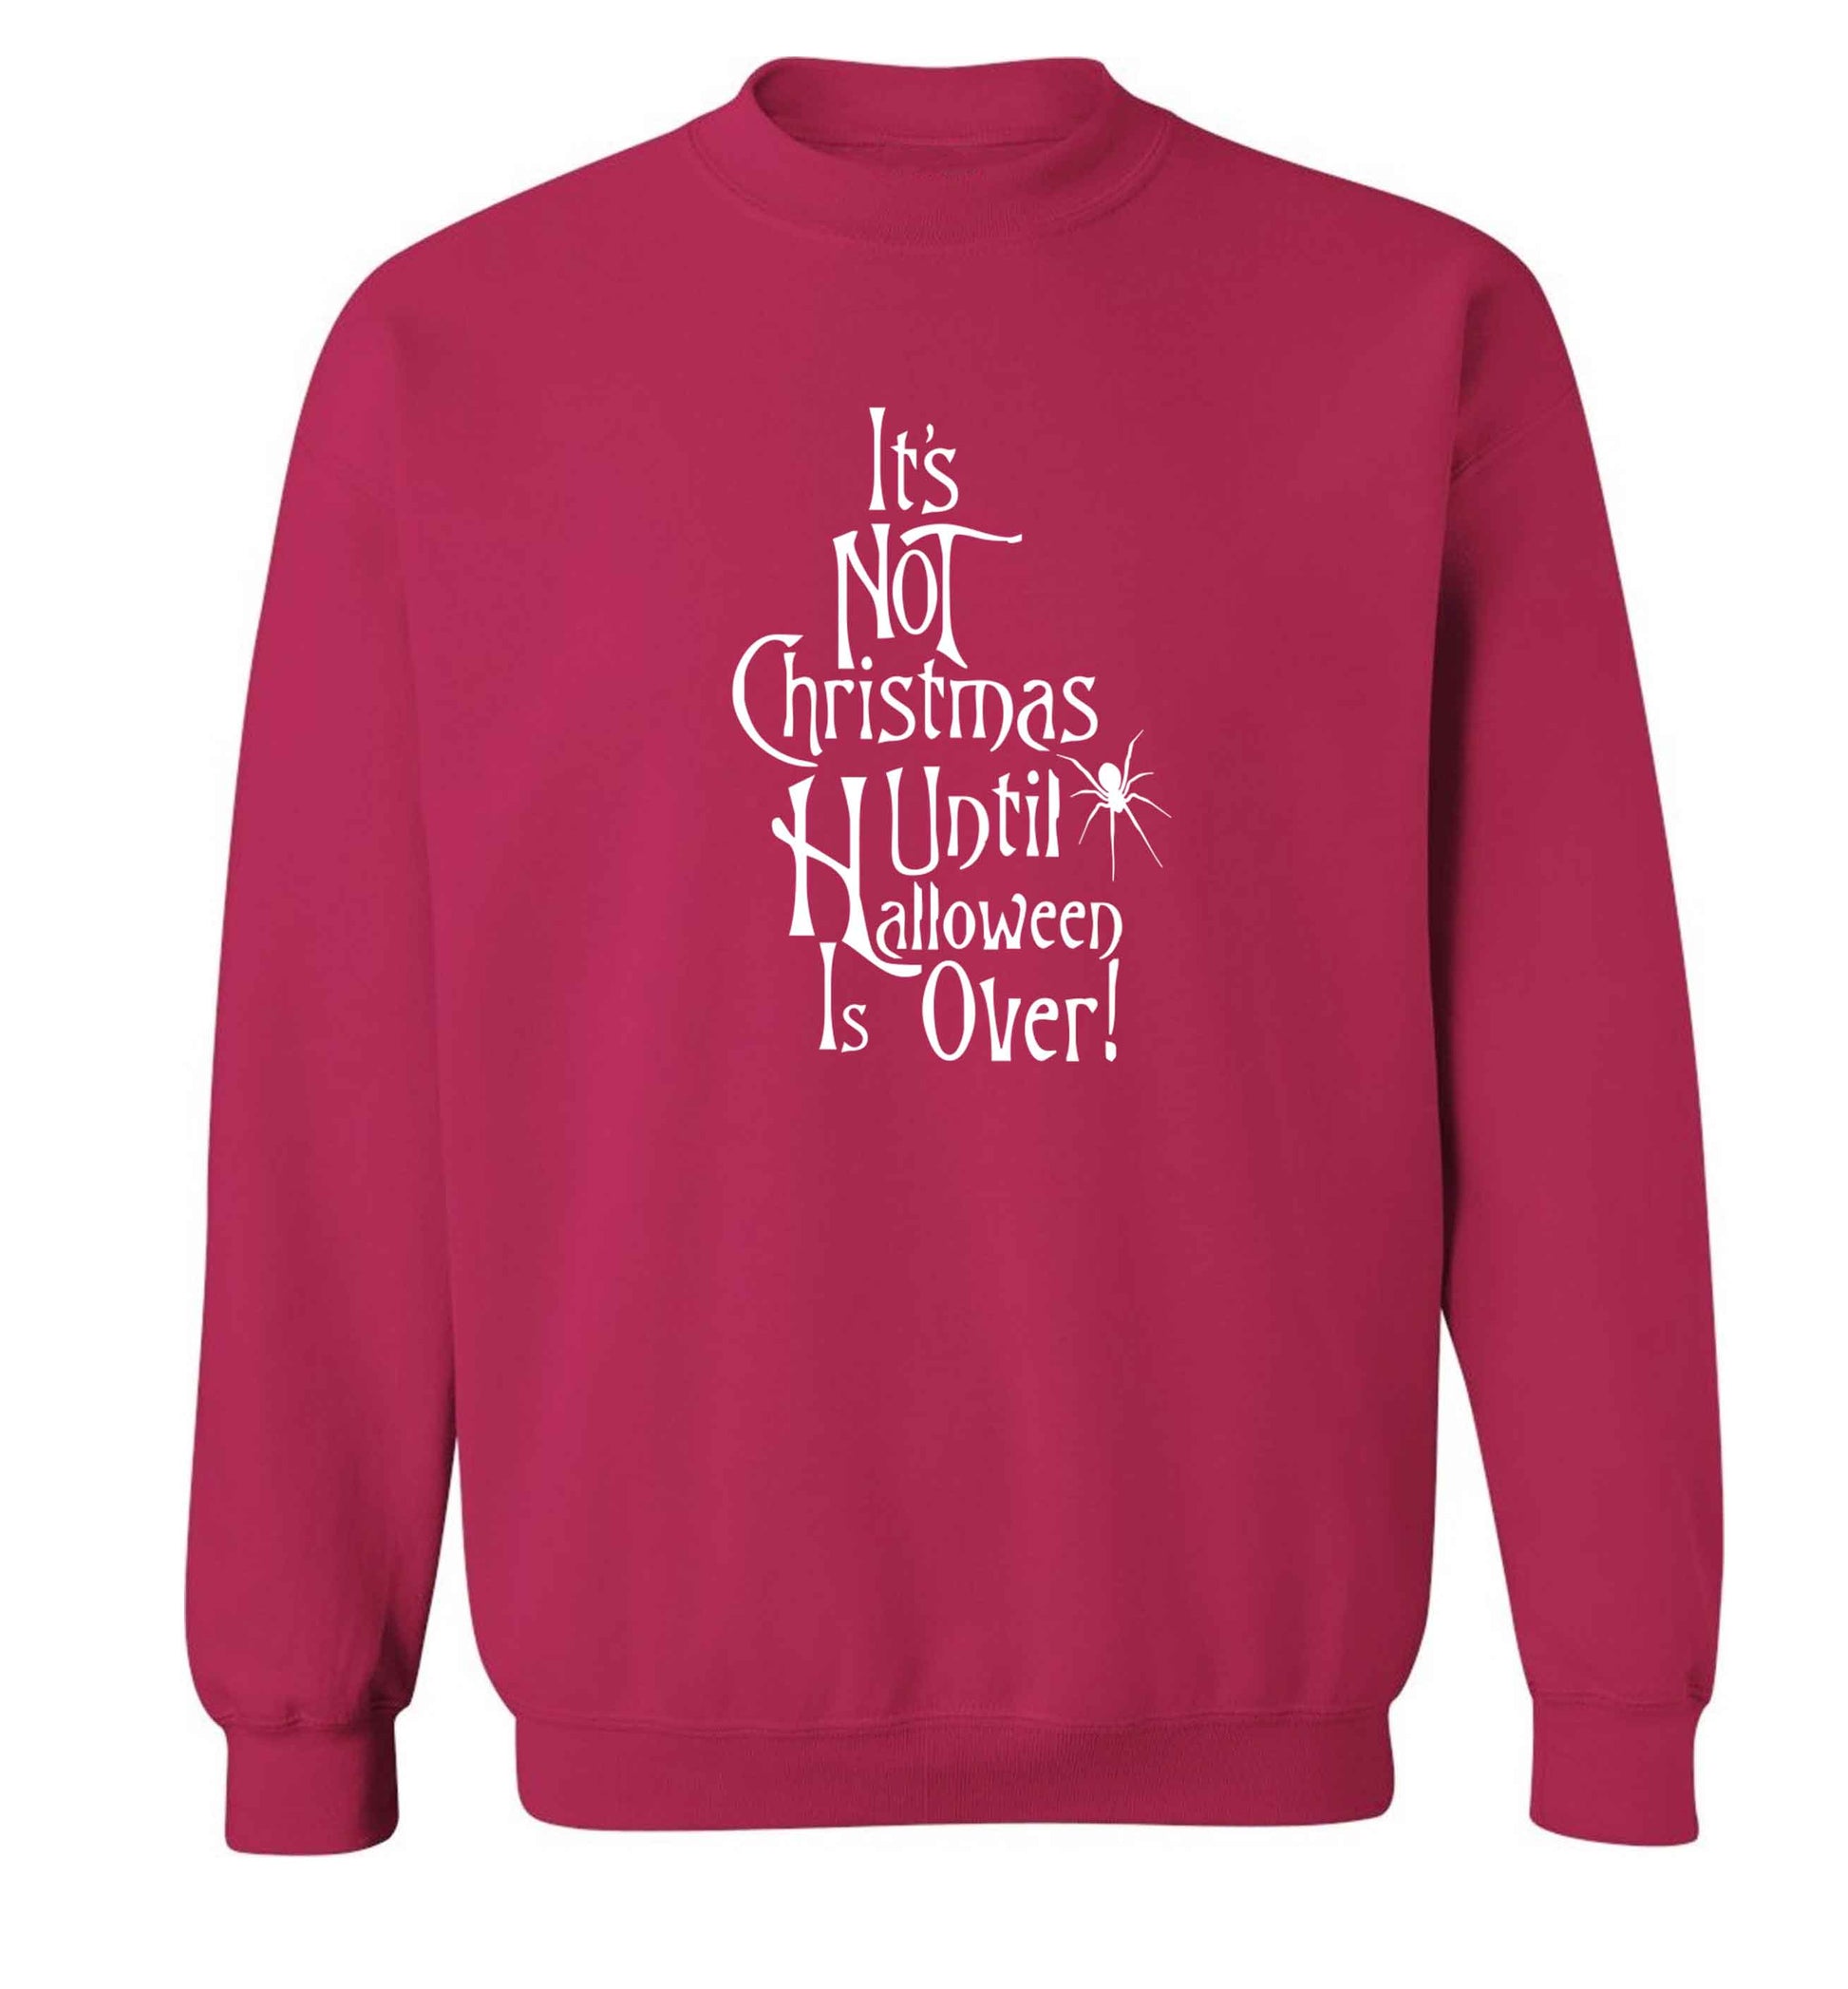 It's not Christmas until Halloween is over adult's unisex pink sweater 2XL